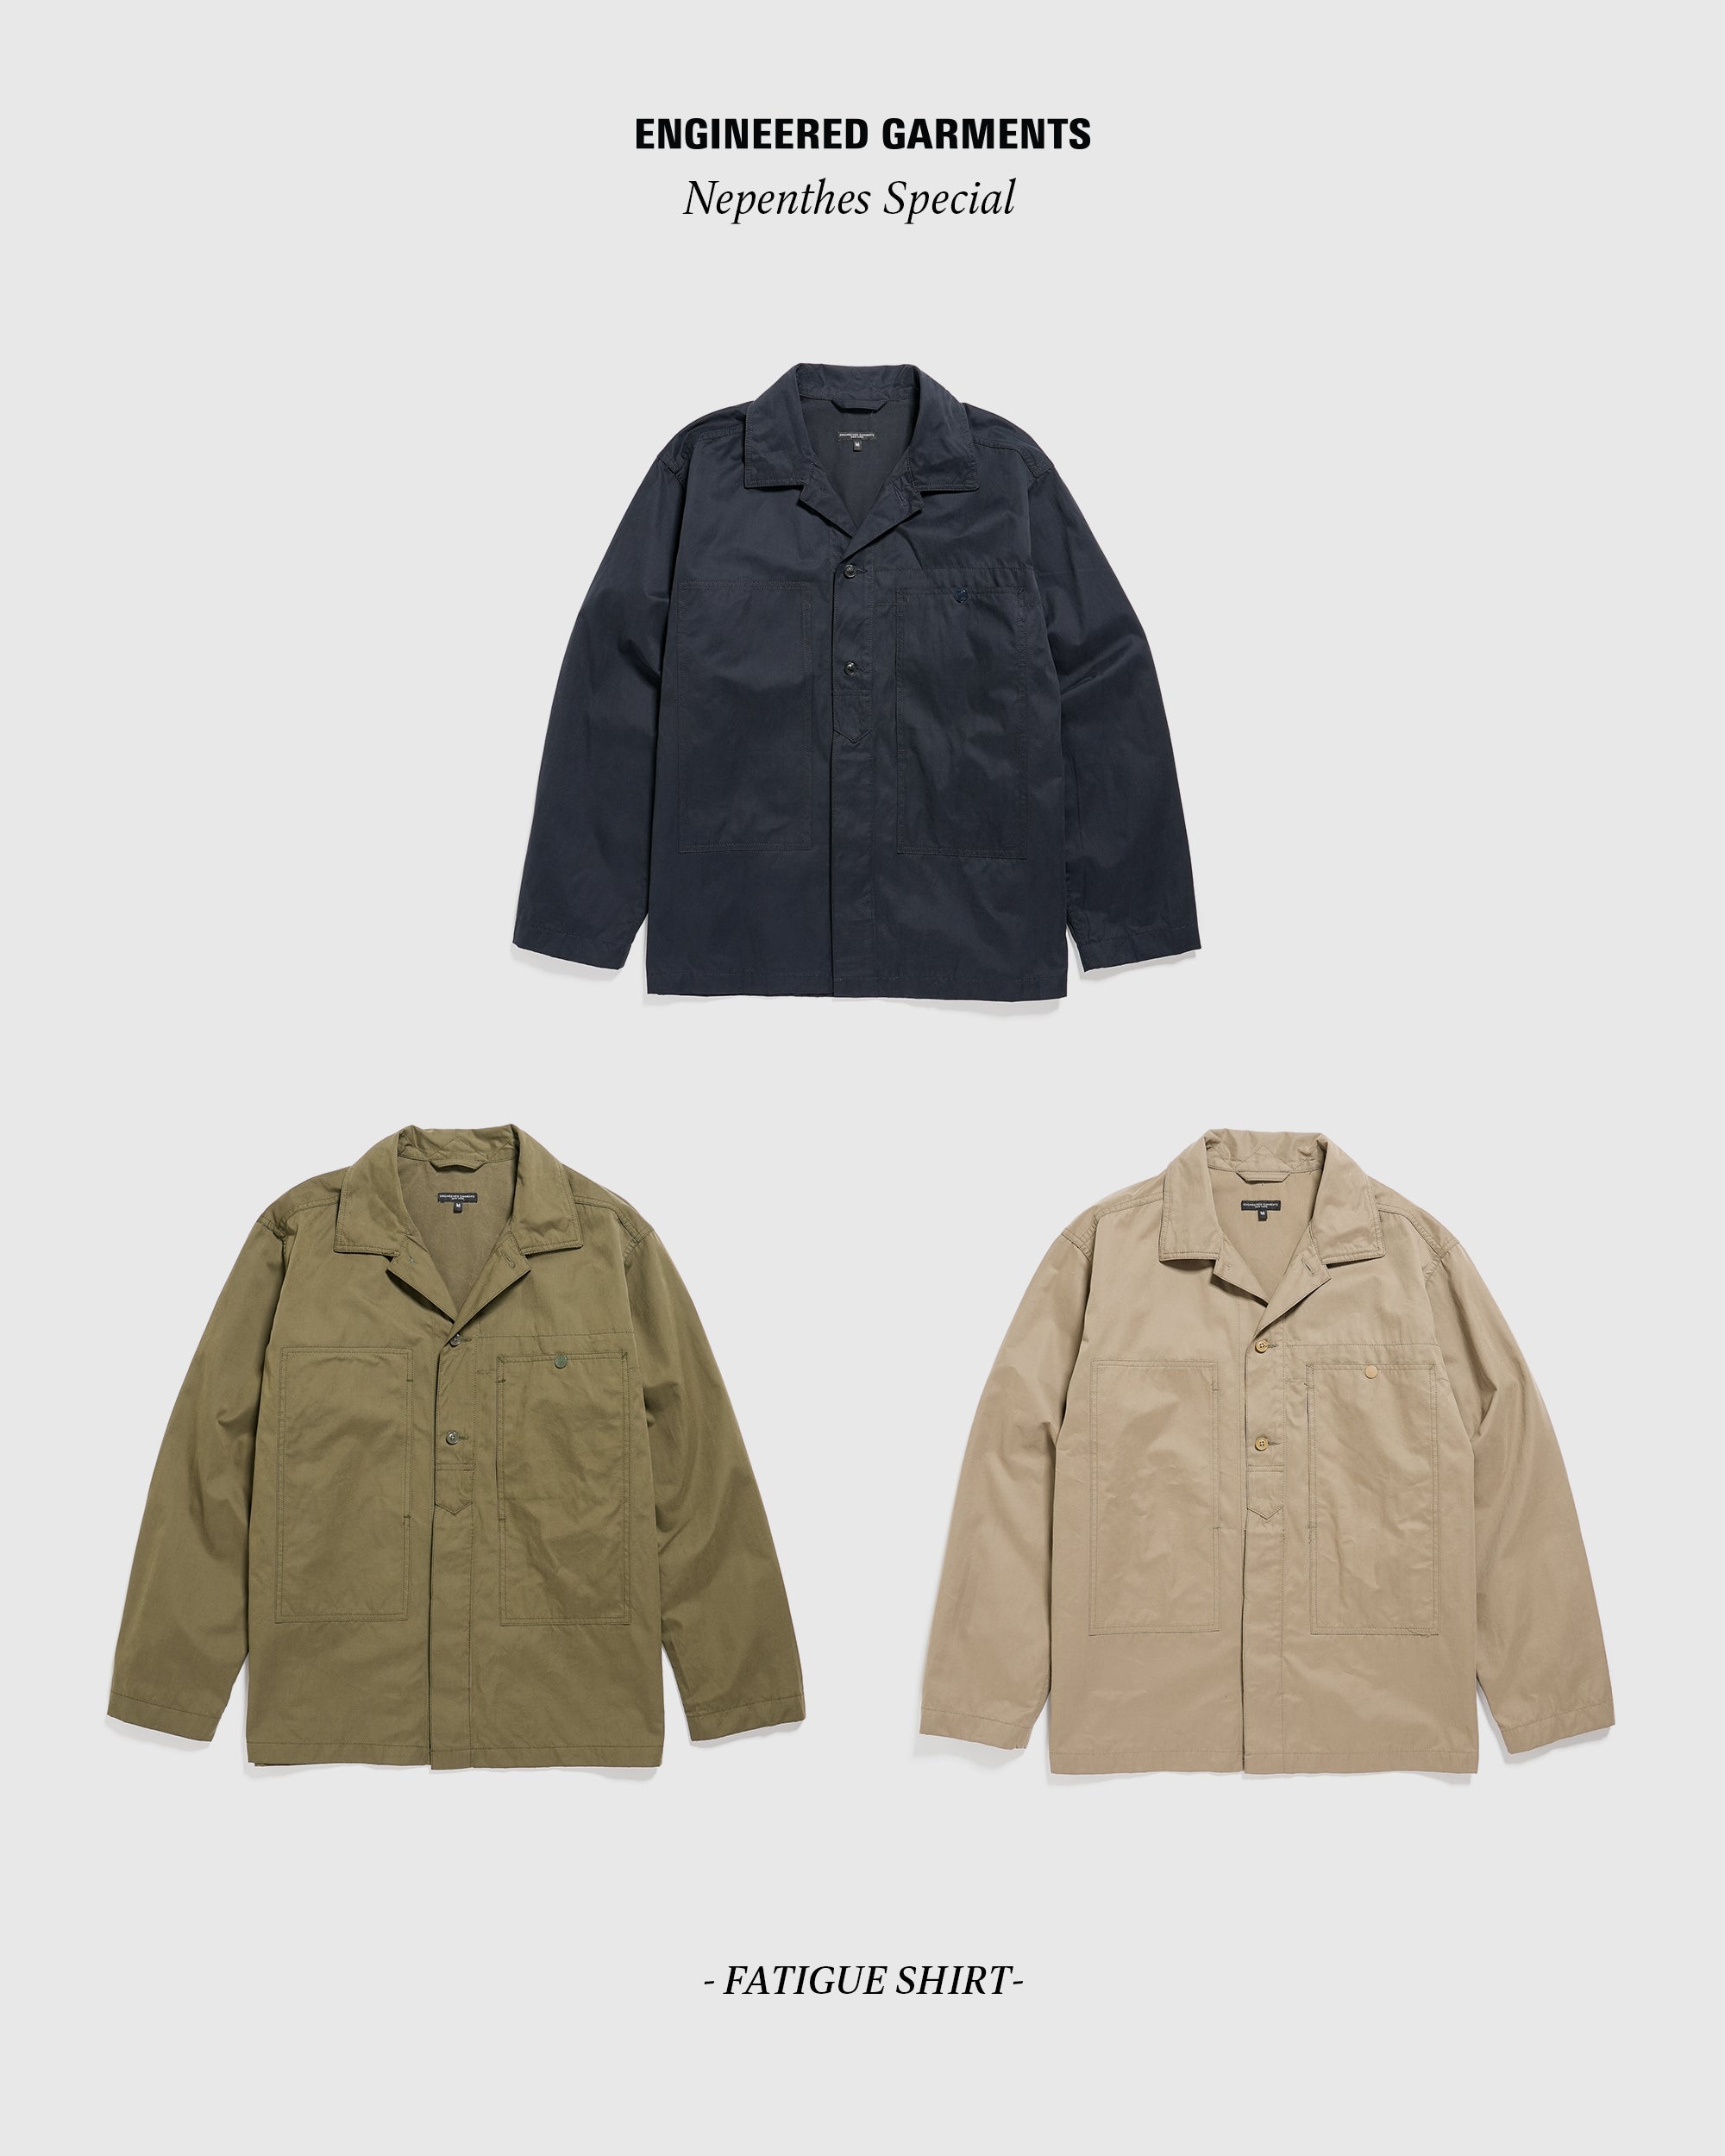 ENGINEERED GARMENTS FALL WINTER 2022 NEPENTHES SPECIAL